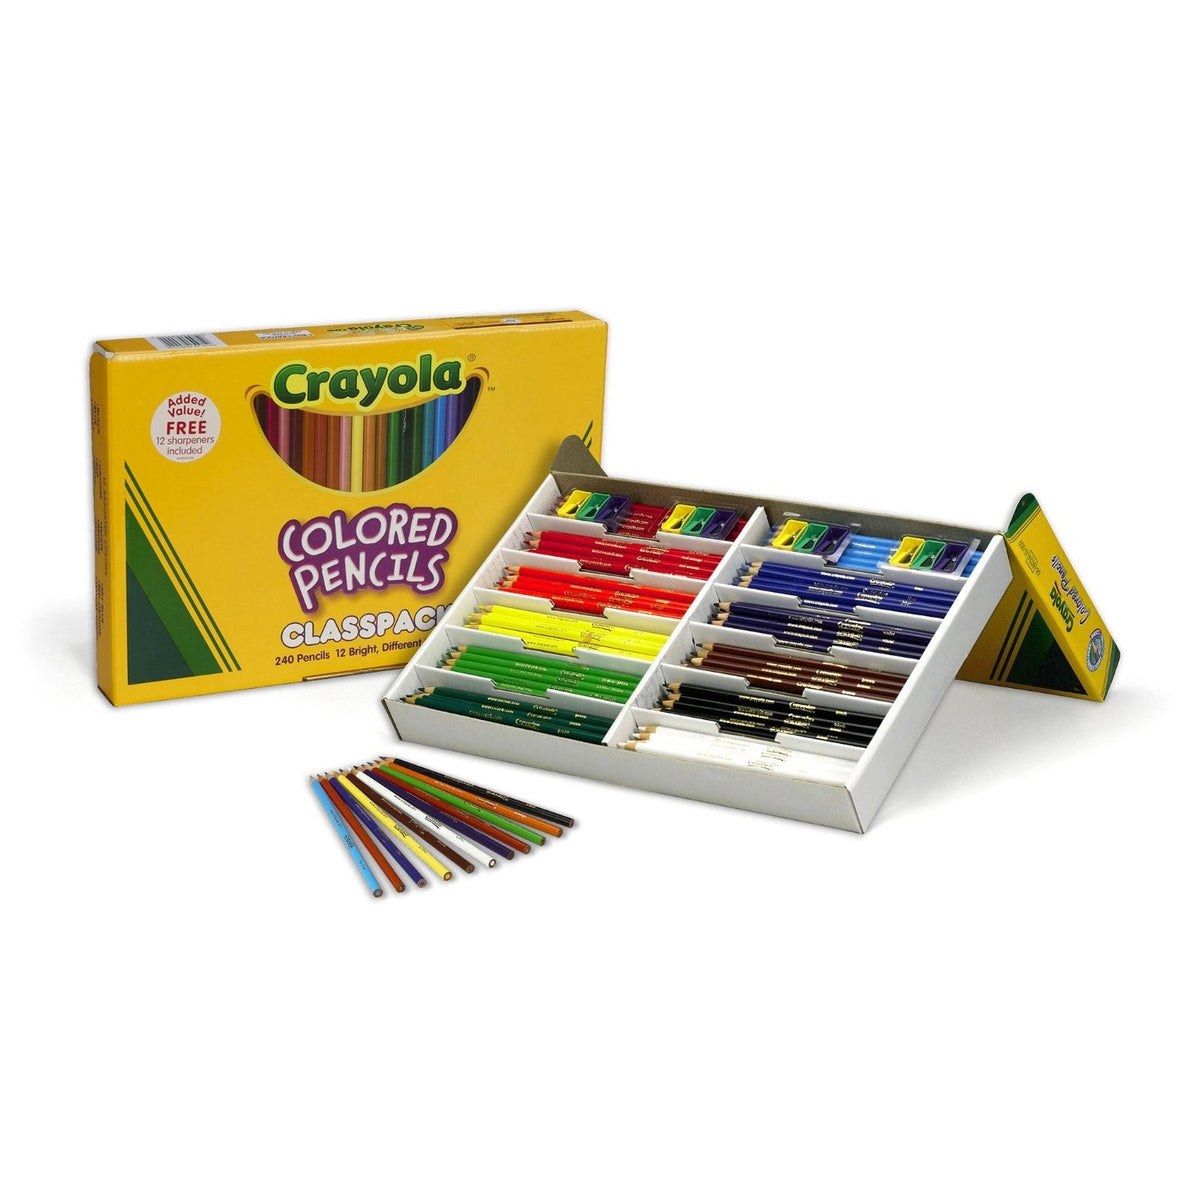 Sky-blue Crayola Colored Pencils Set of 5 or 10 With Sharpener 